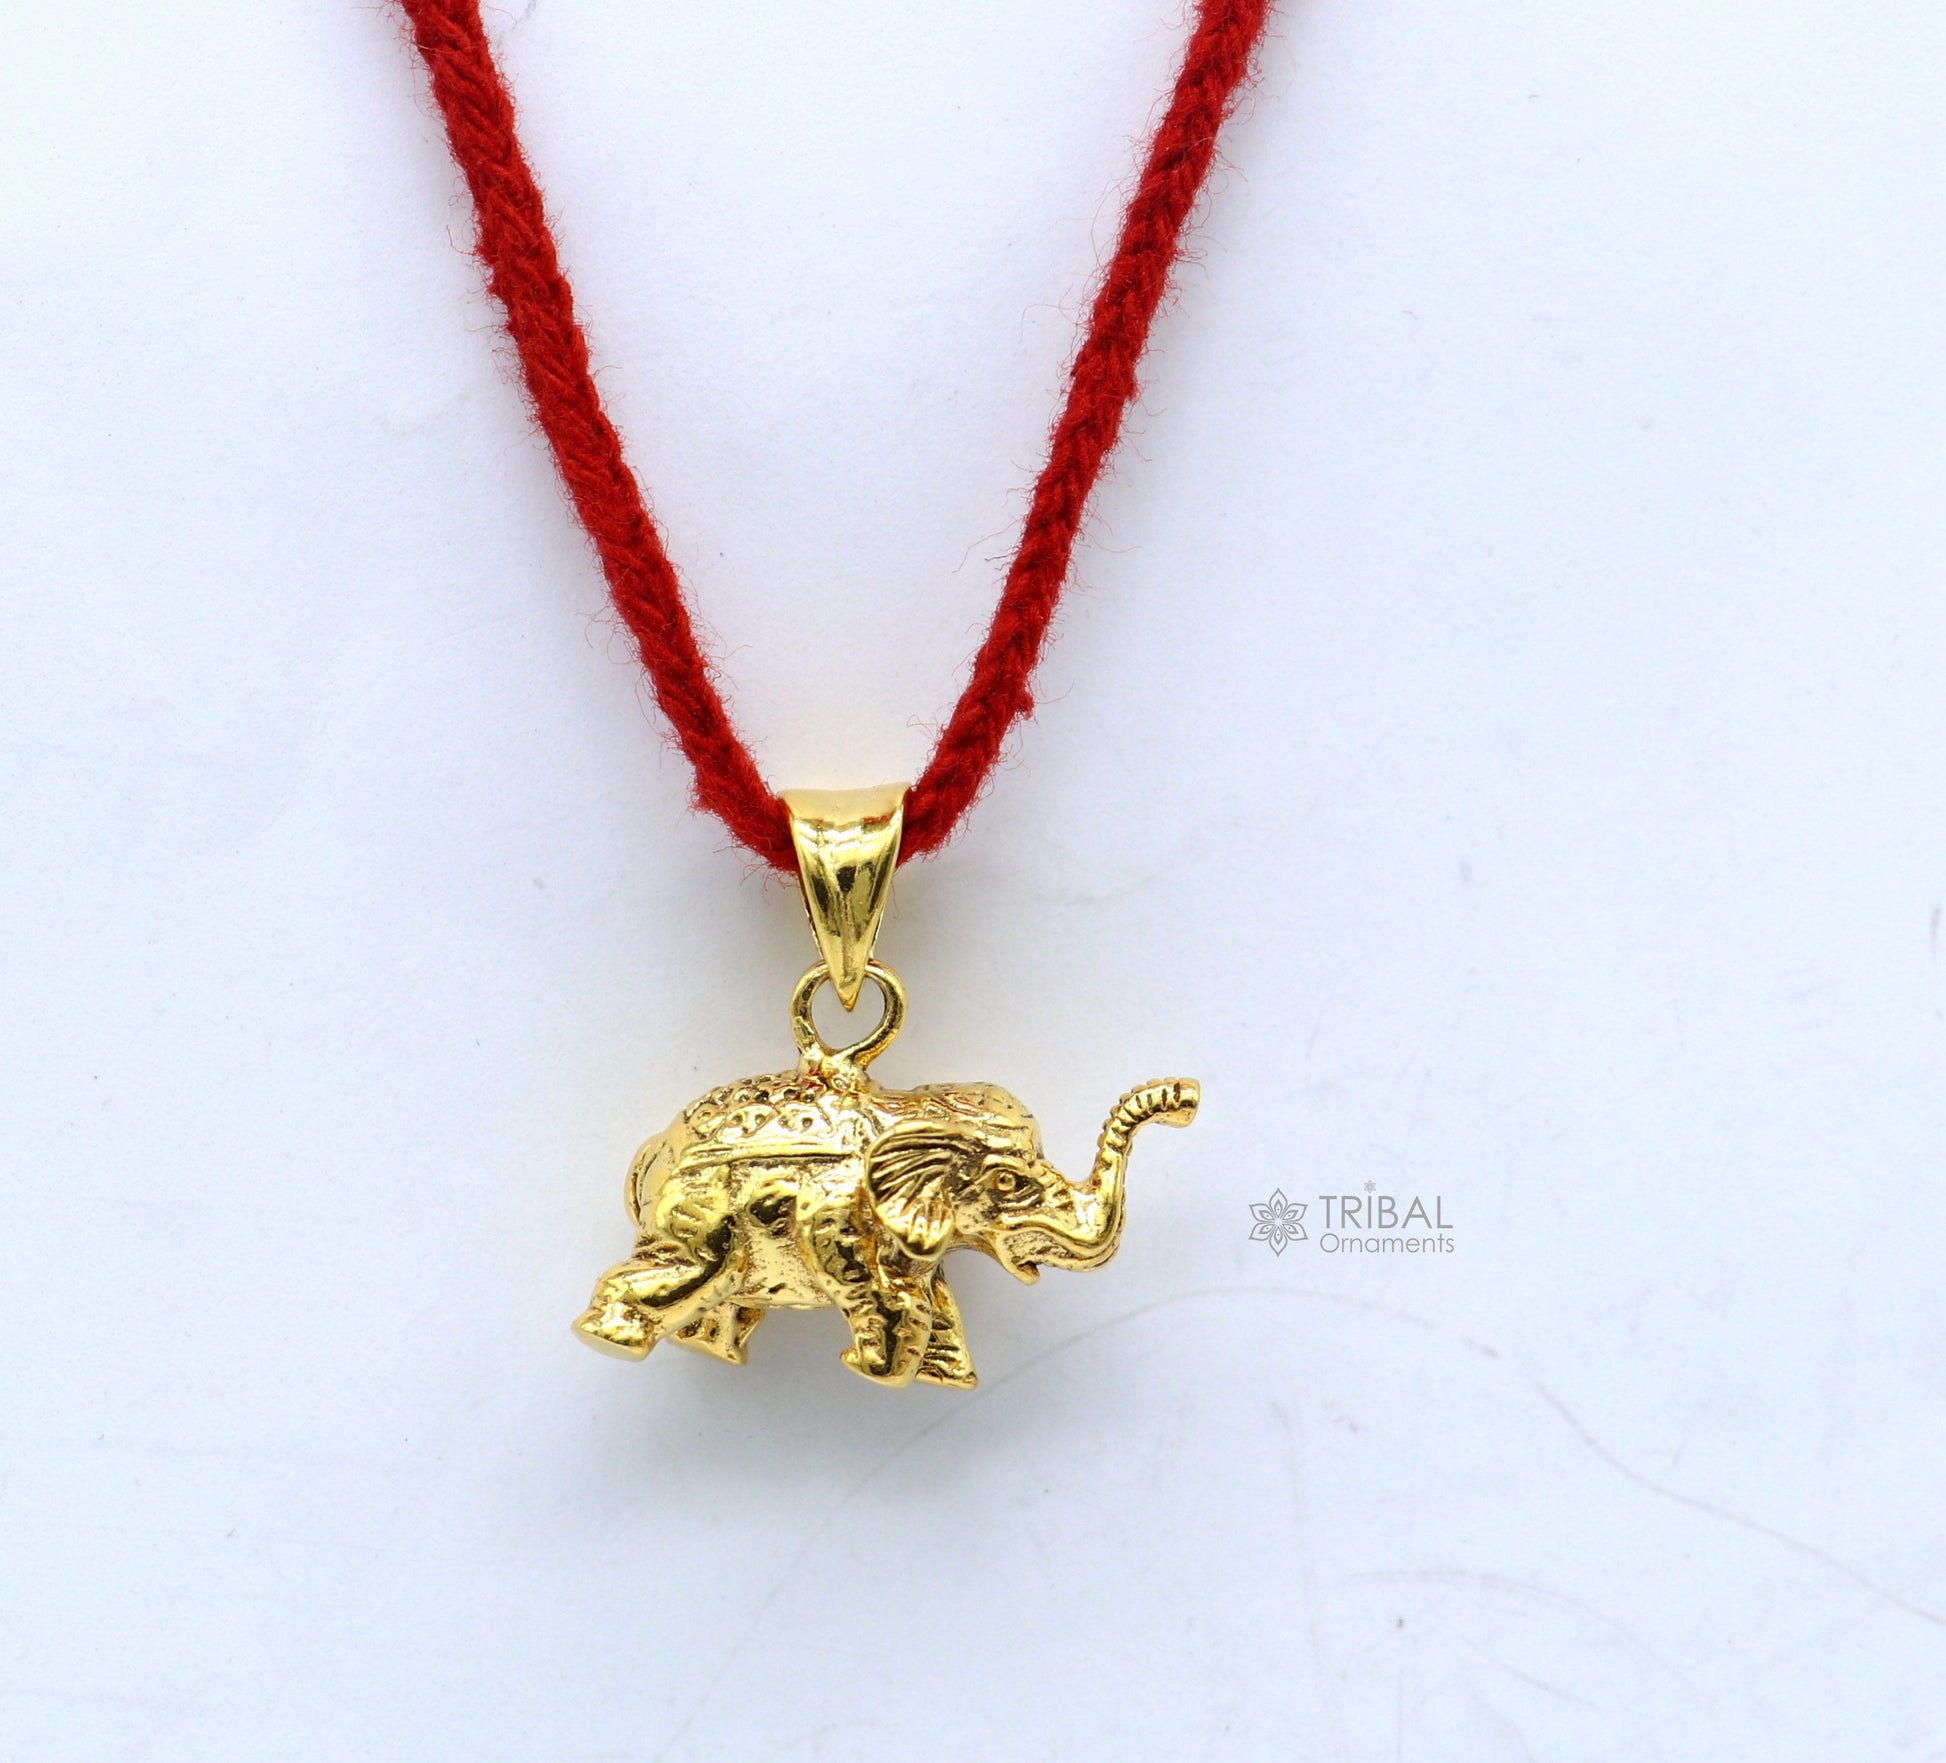 925 sterling silver handmade solid design small elephant pendant amazing exclusive divine lucky gold polished pendant jewelry nsp610 - TRIBAL ORNAMENTS